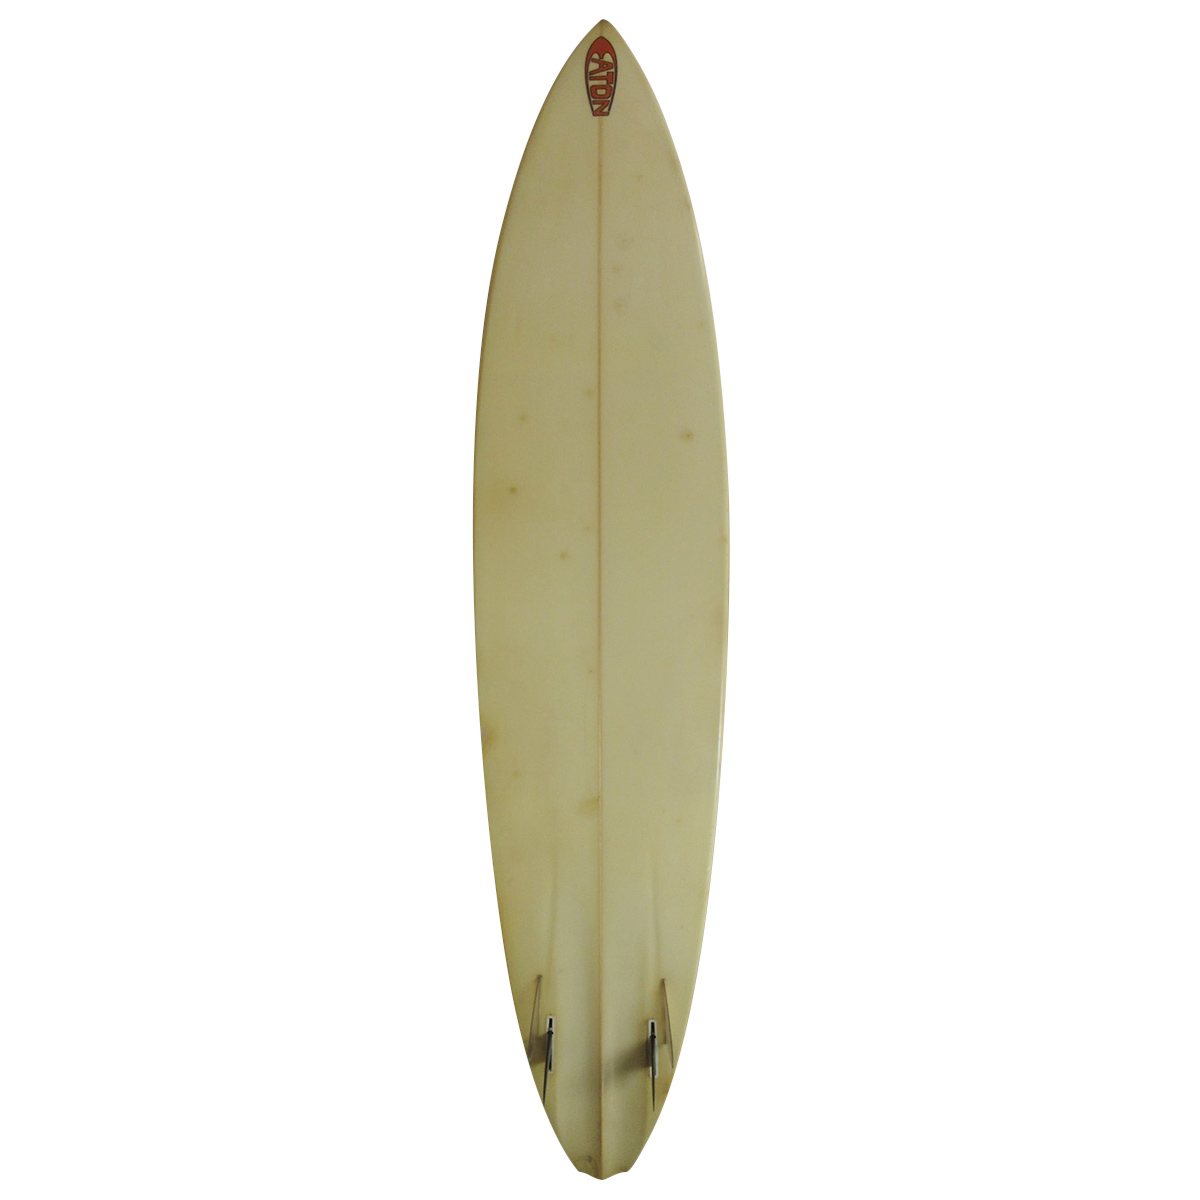 EATON SURFBOARDS / 9`1 Original Zinger Shaped By Mike Eaton 